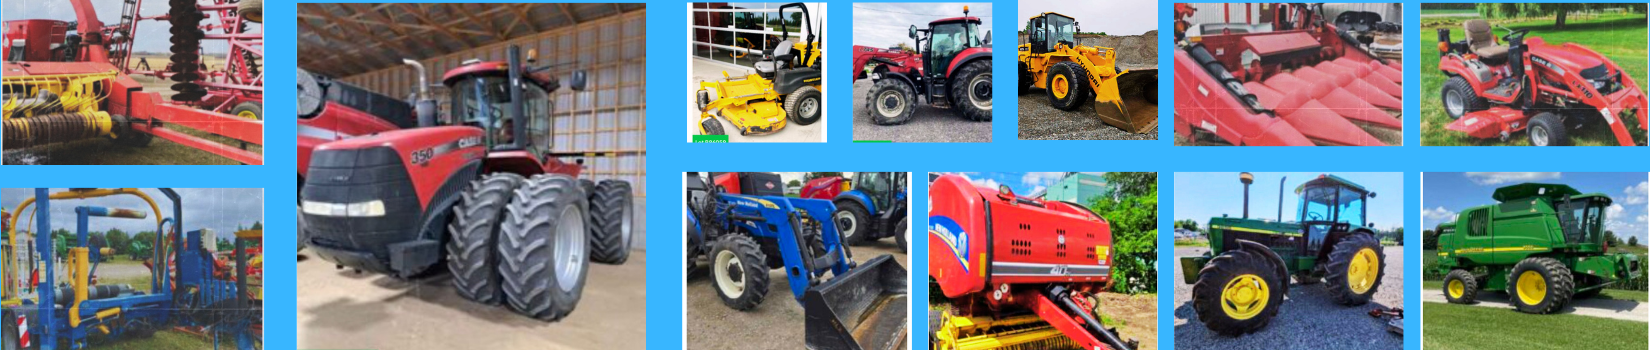 ConsignBid Online Auction Farm and Construction Related Items July 31st 1 PM